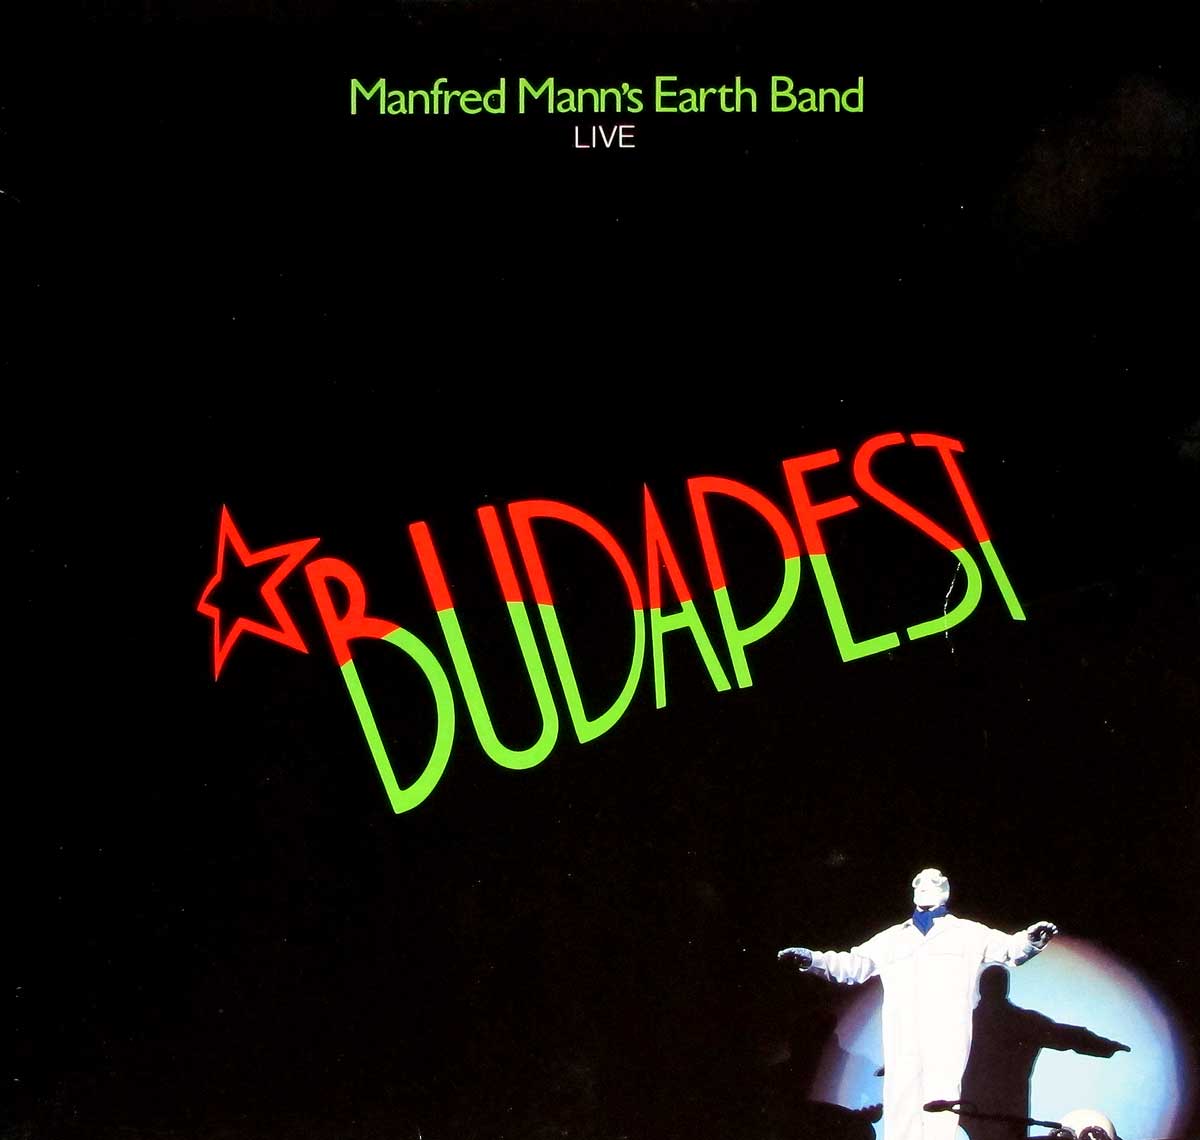 large album front cover photo of: MANFRED MANN'S EARTH BAND BUDAPEST LIVE 12" LP Vinyl Album 